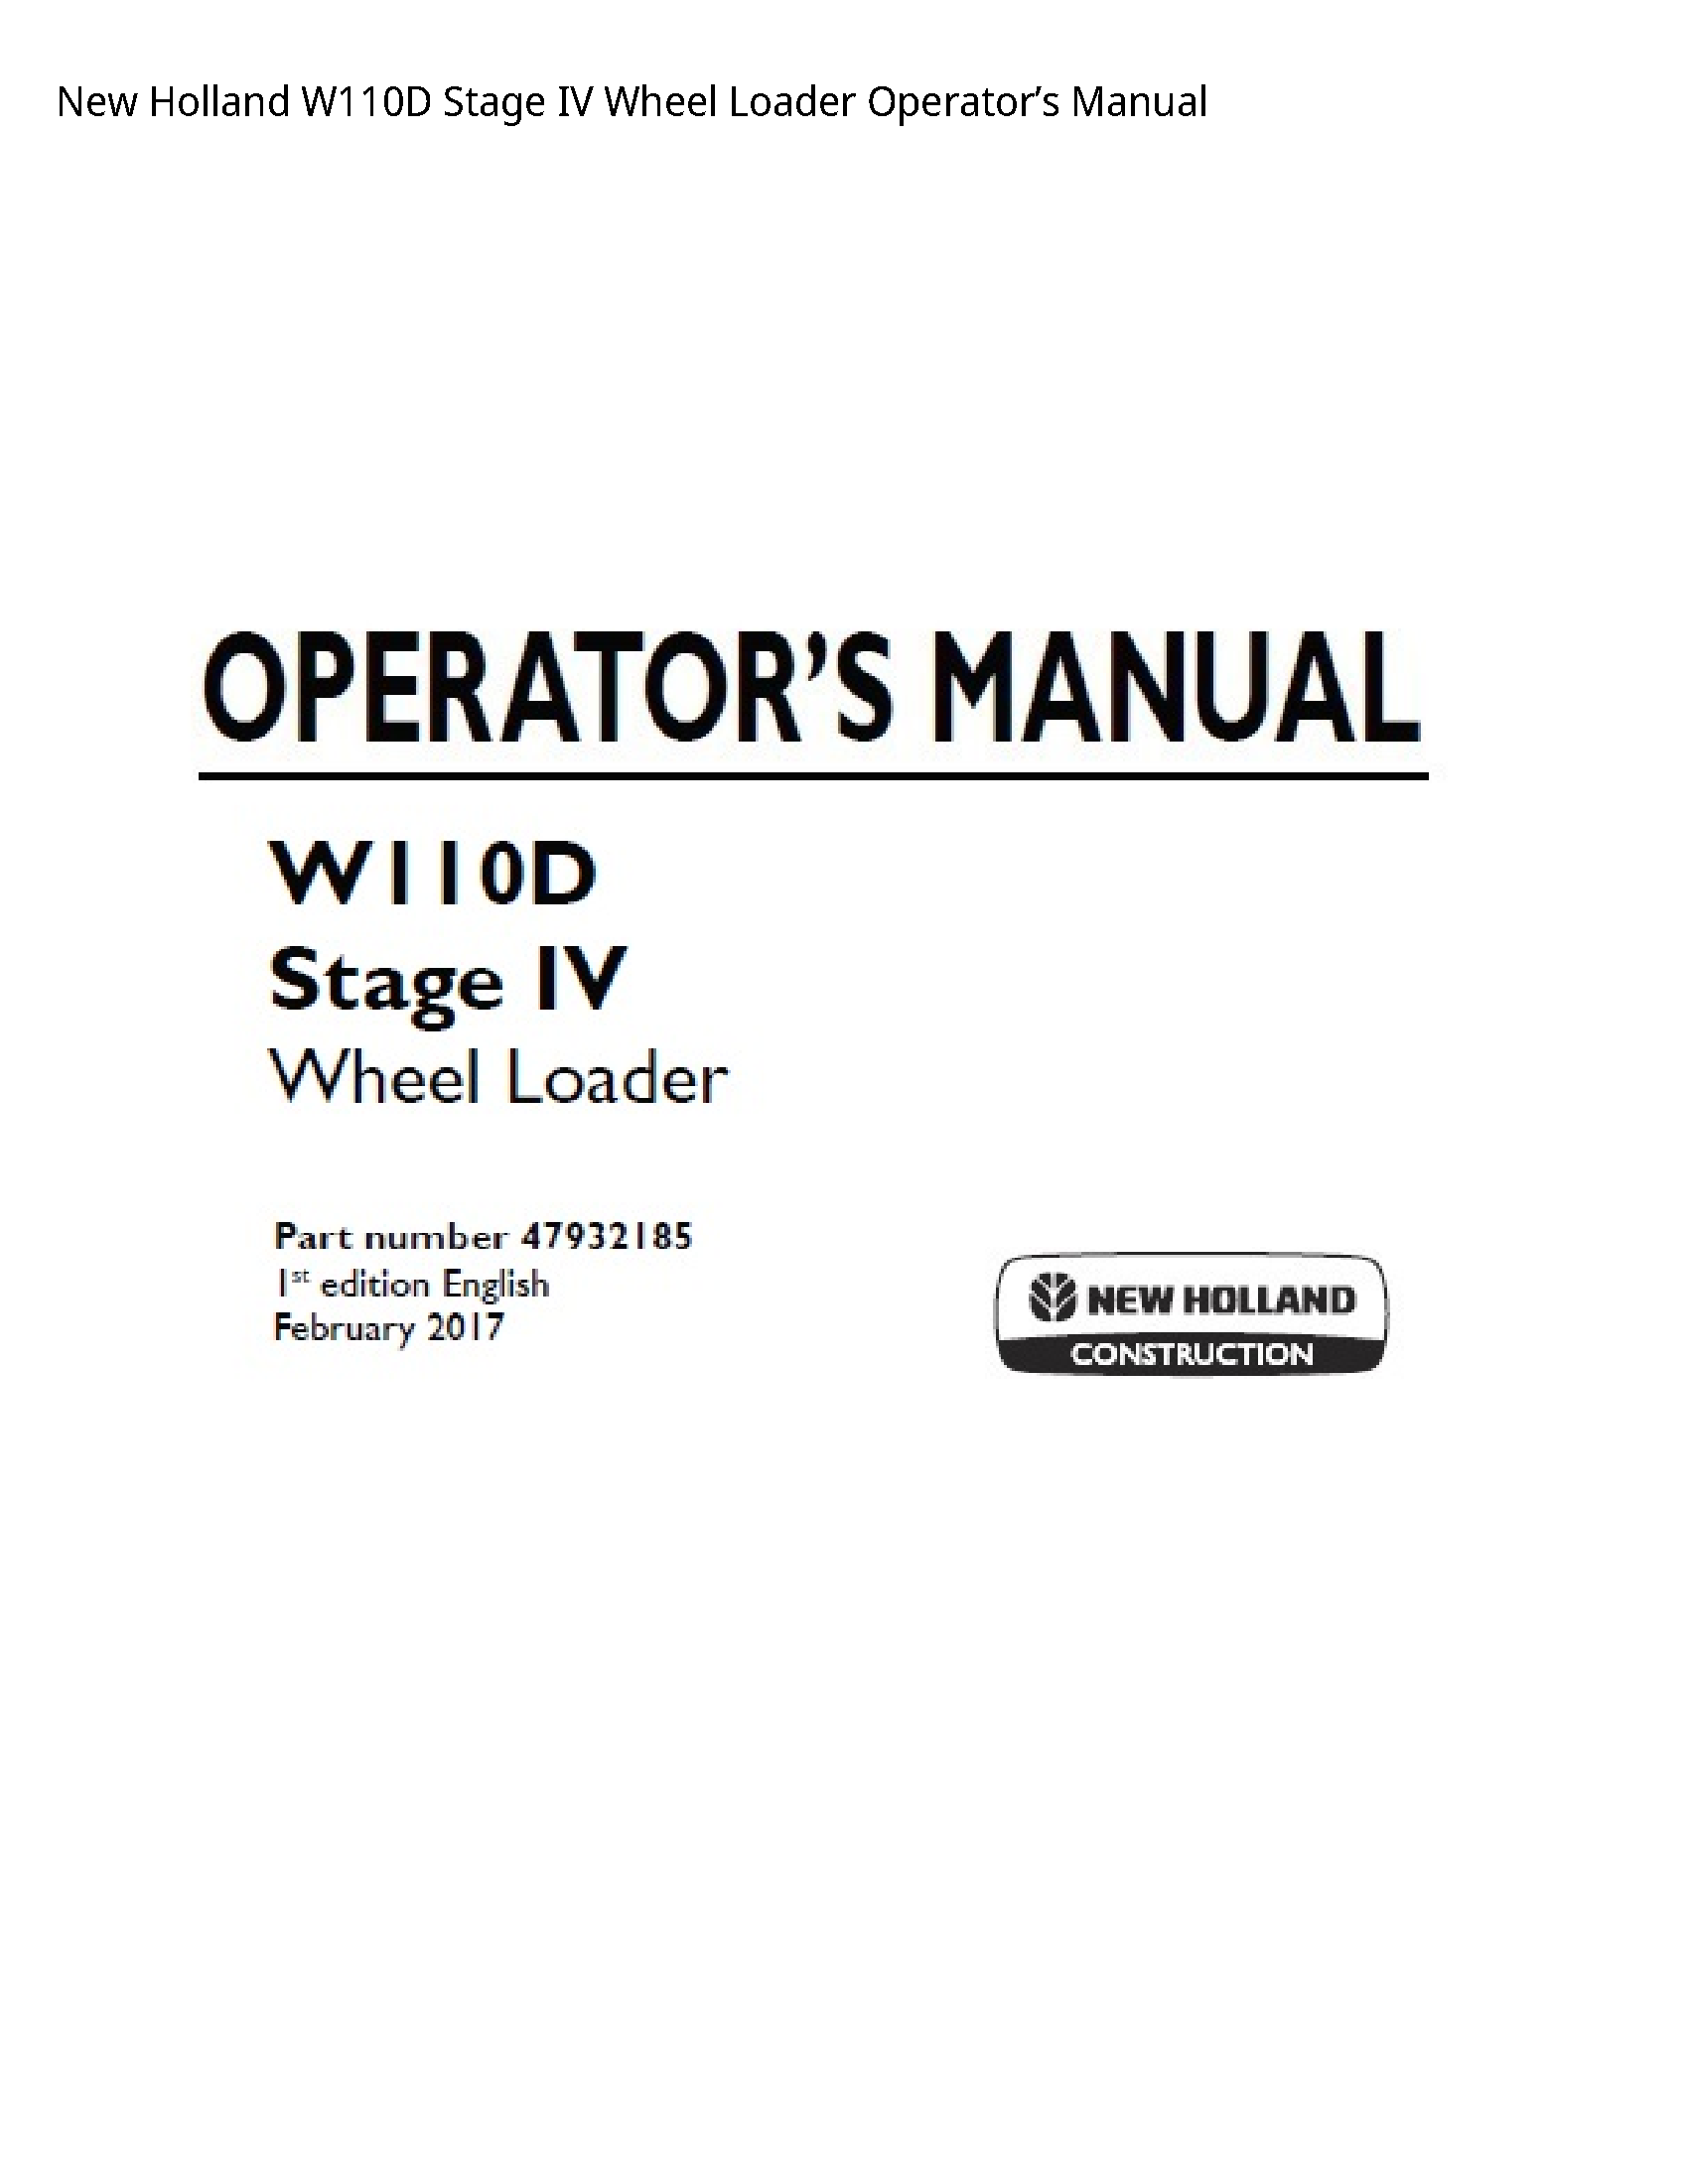 New Holland W110D Stage IV Wheel Loader Operator’s manual